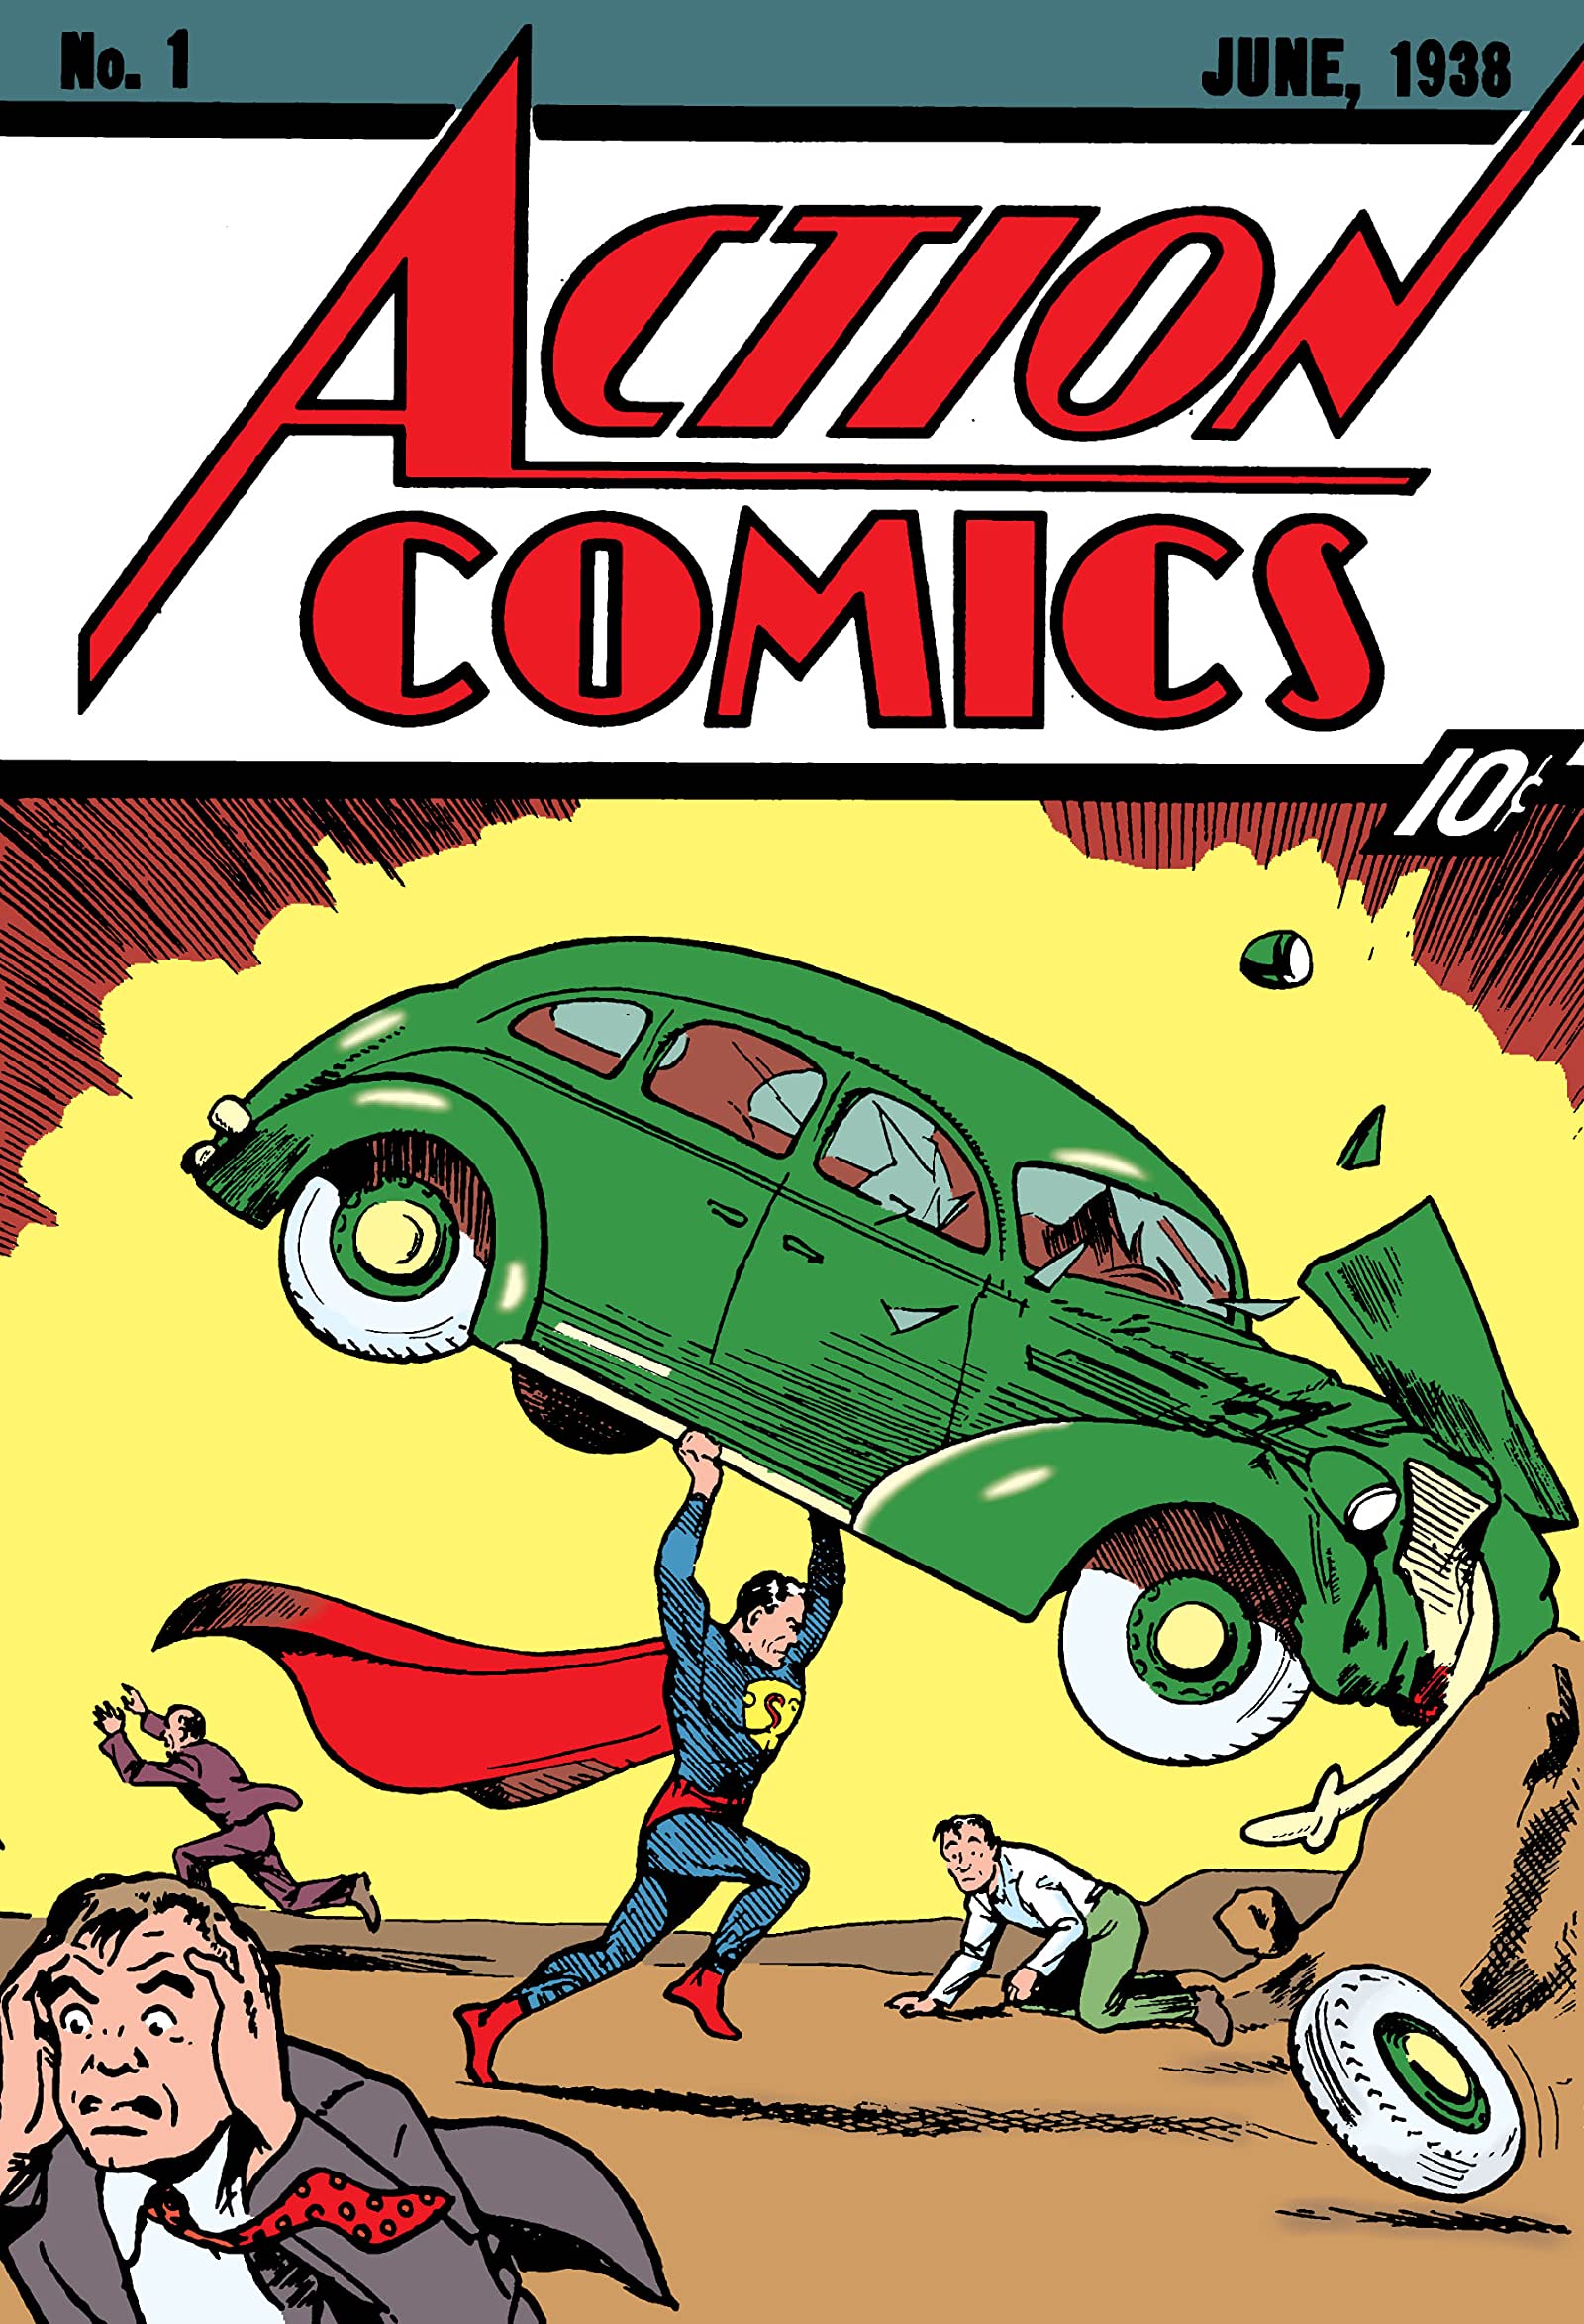 Rare Action Comics 1, Superman's Debut Issue, Sells for Record 3.2